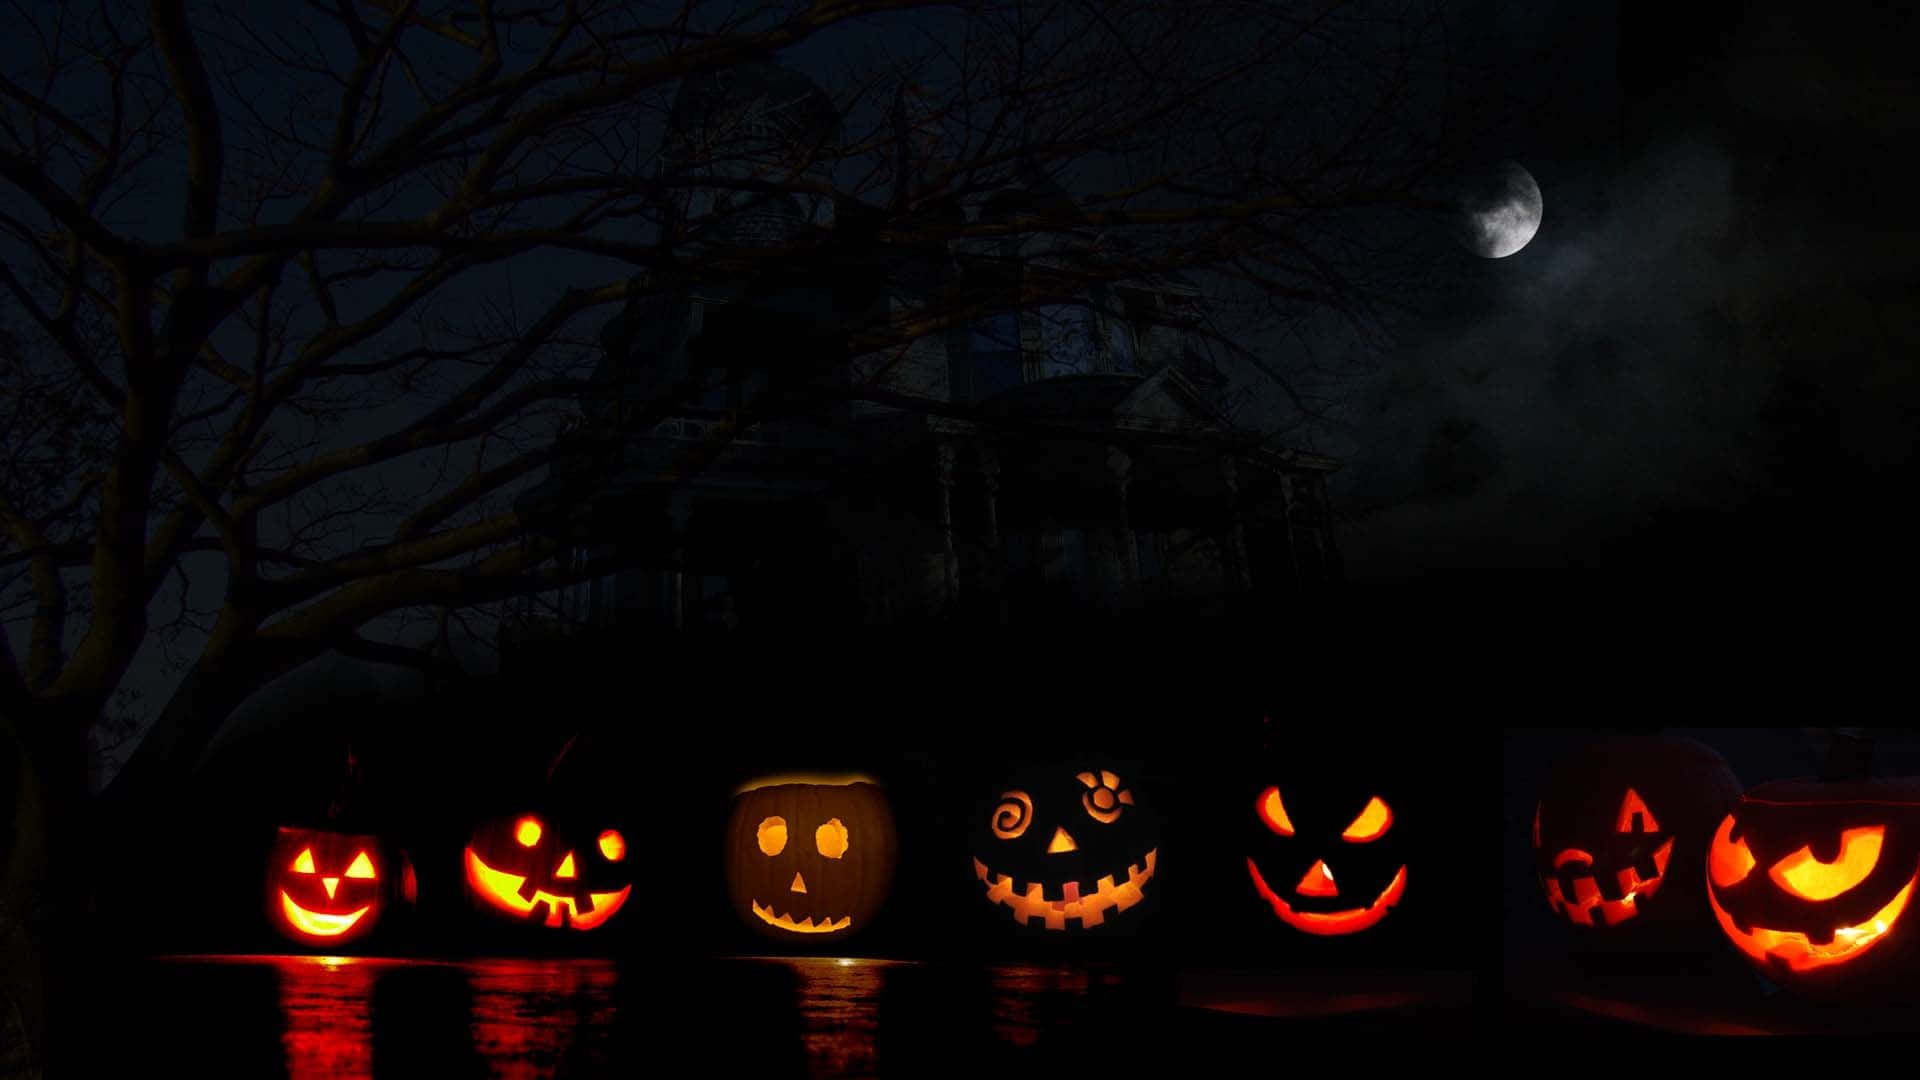 Celebrate Halloween with some spooky fun! Wallpaper